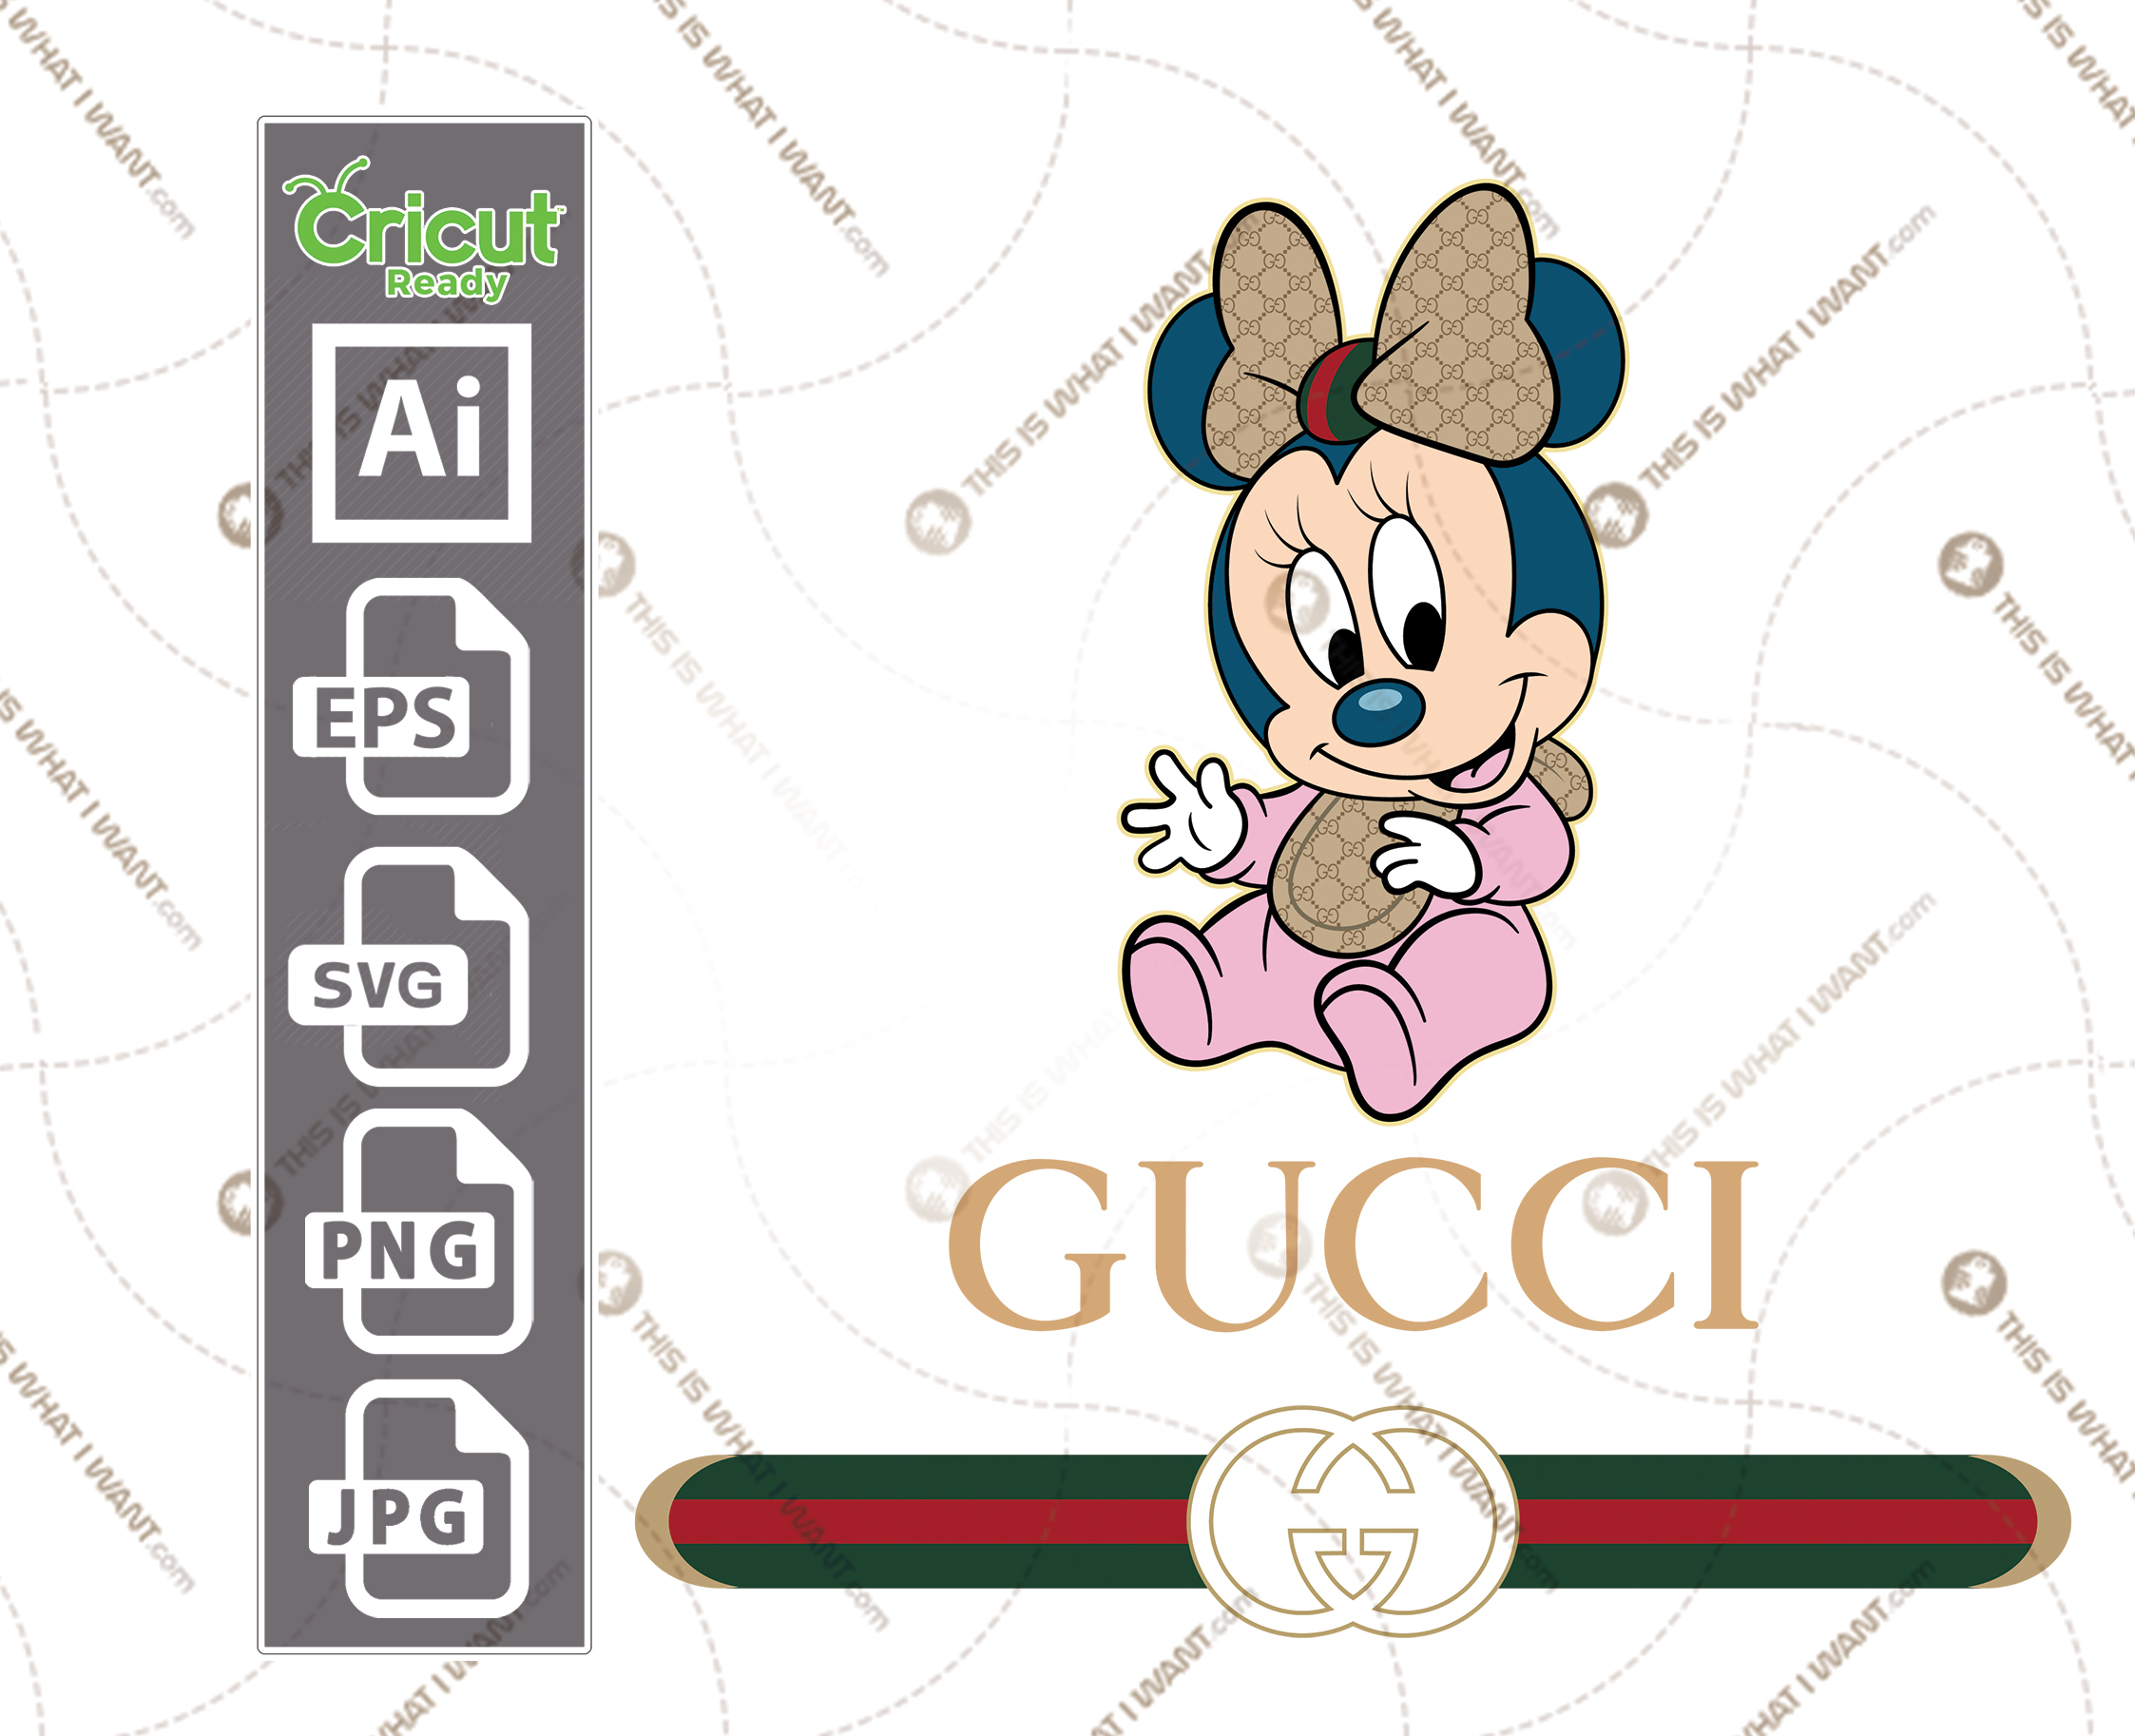 Download Gucci Baby Minnie Mouse Inspired Vector Art Design Hi Quality Digital Downloadable Files Bundle Ai Svg Jpg Png Eps Cricut Ready This Is What I Want